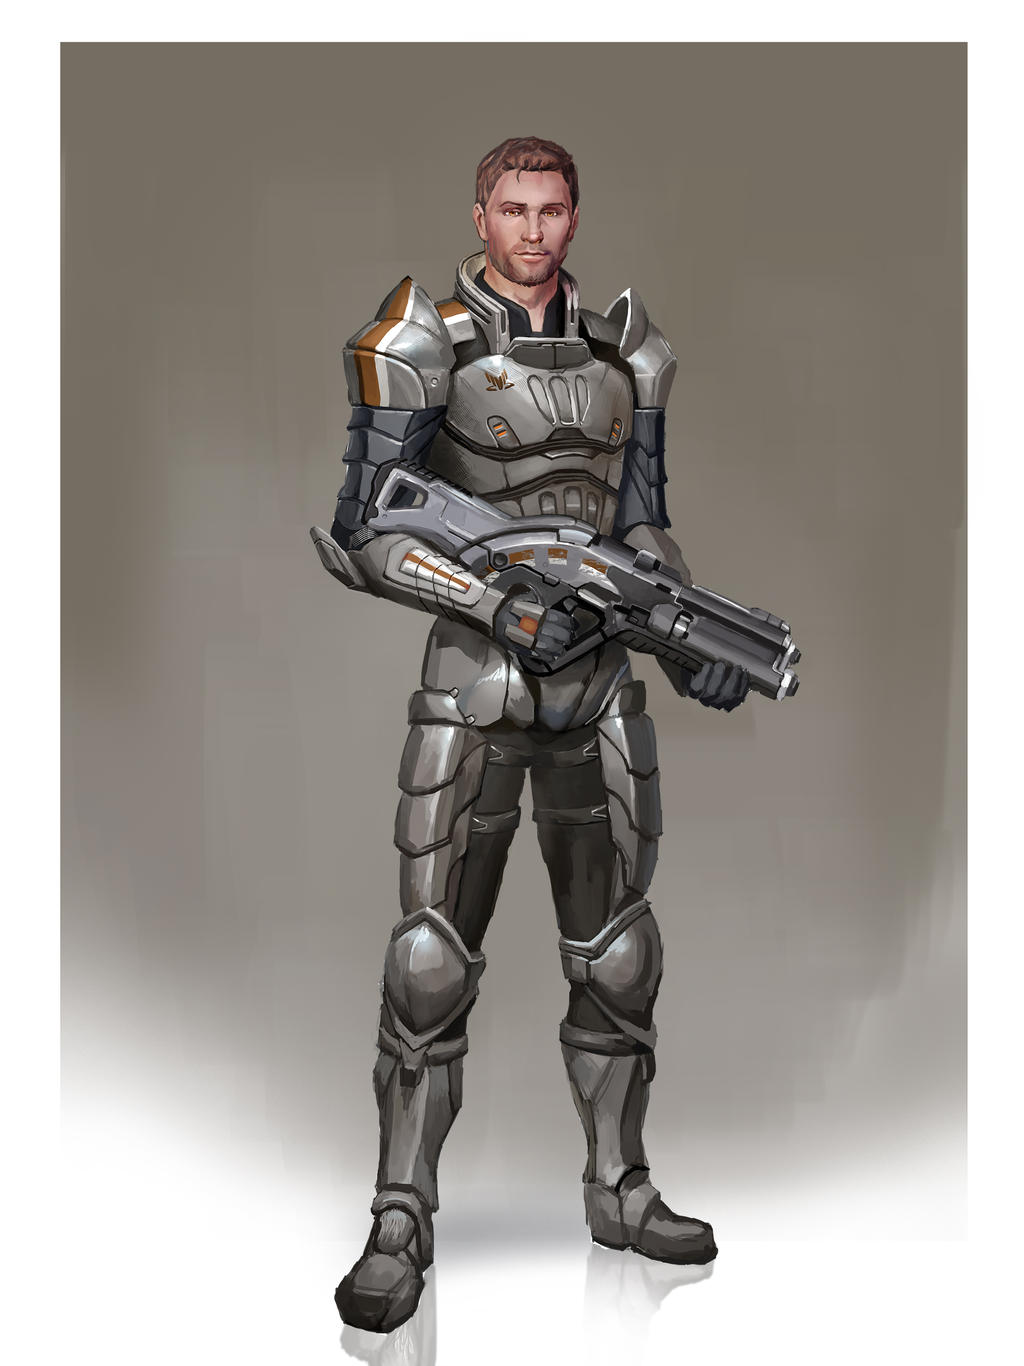 alistair___mass_age_by_andrewryanart-d6qn7p4.jpg